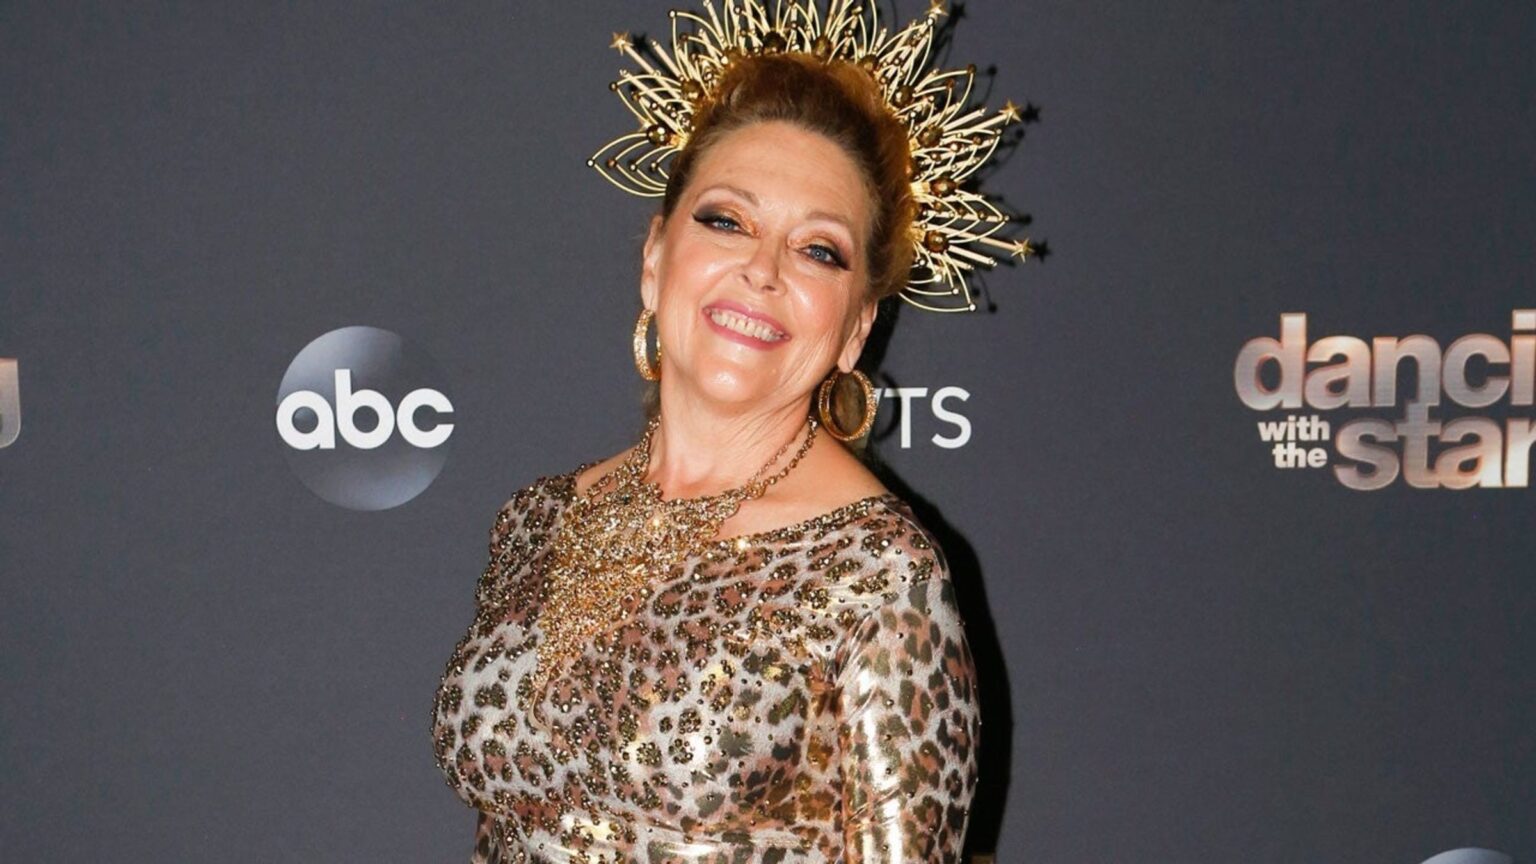 'Tiger King' star Carole Baskin may be getting her own reality show. Is she trying to rescue animals or expand her net worth?